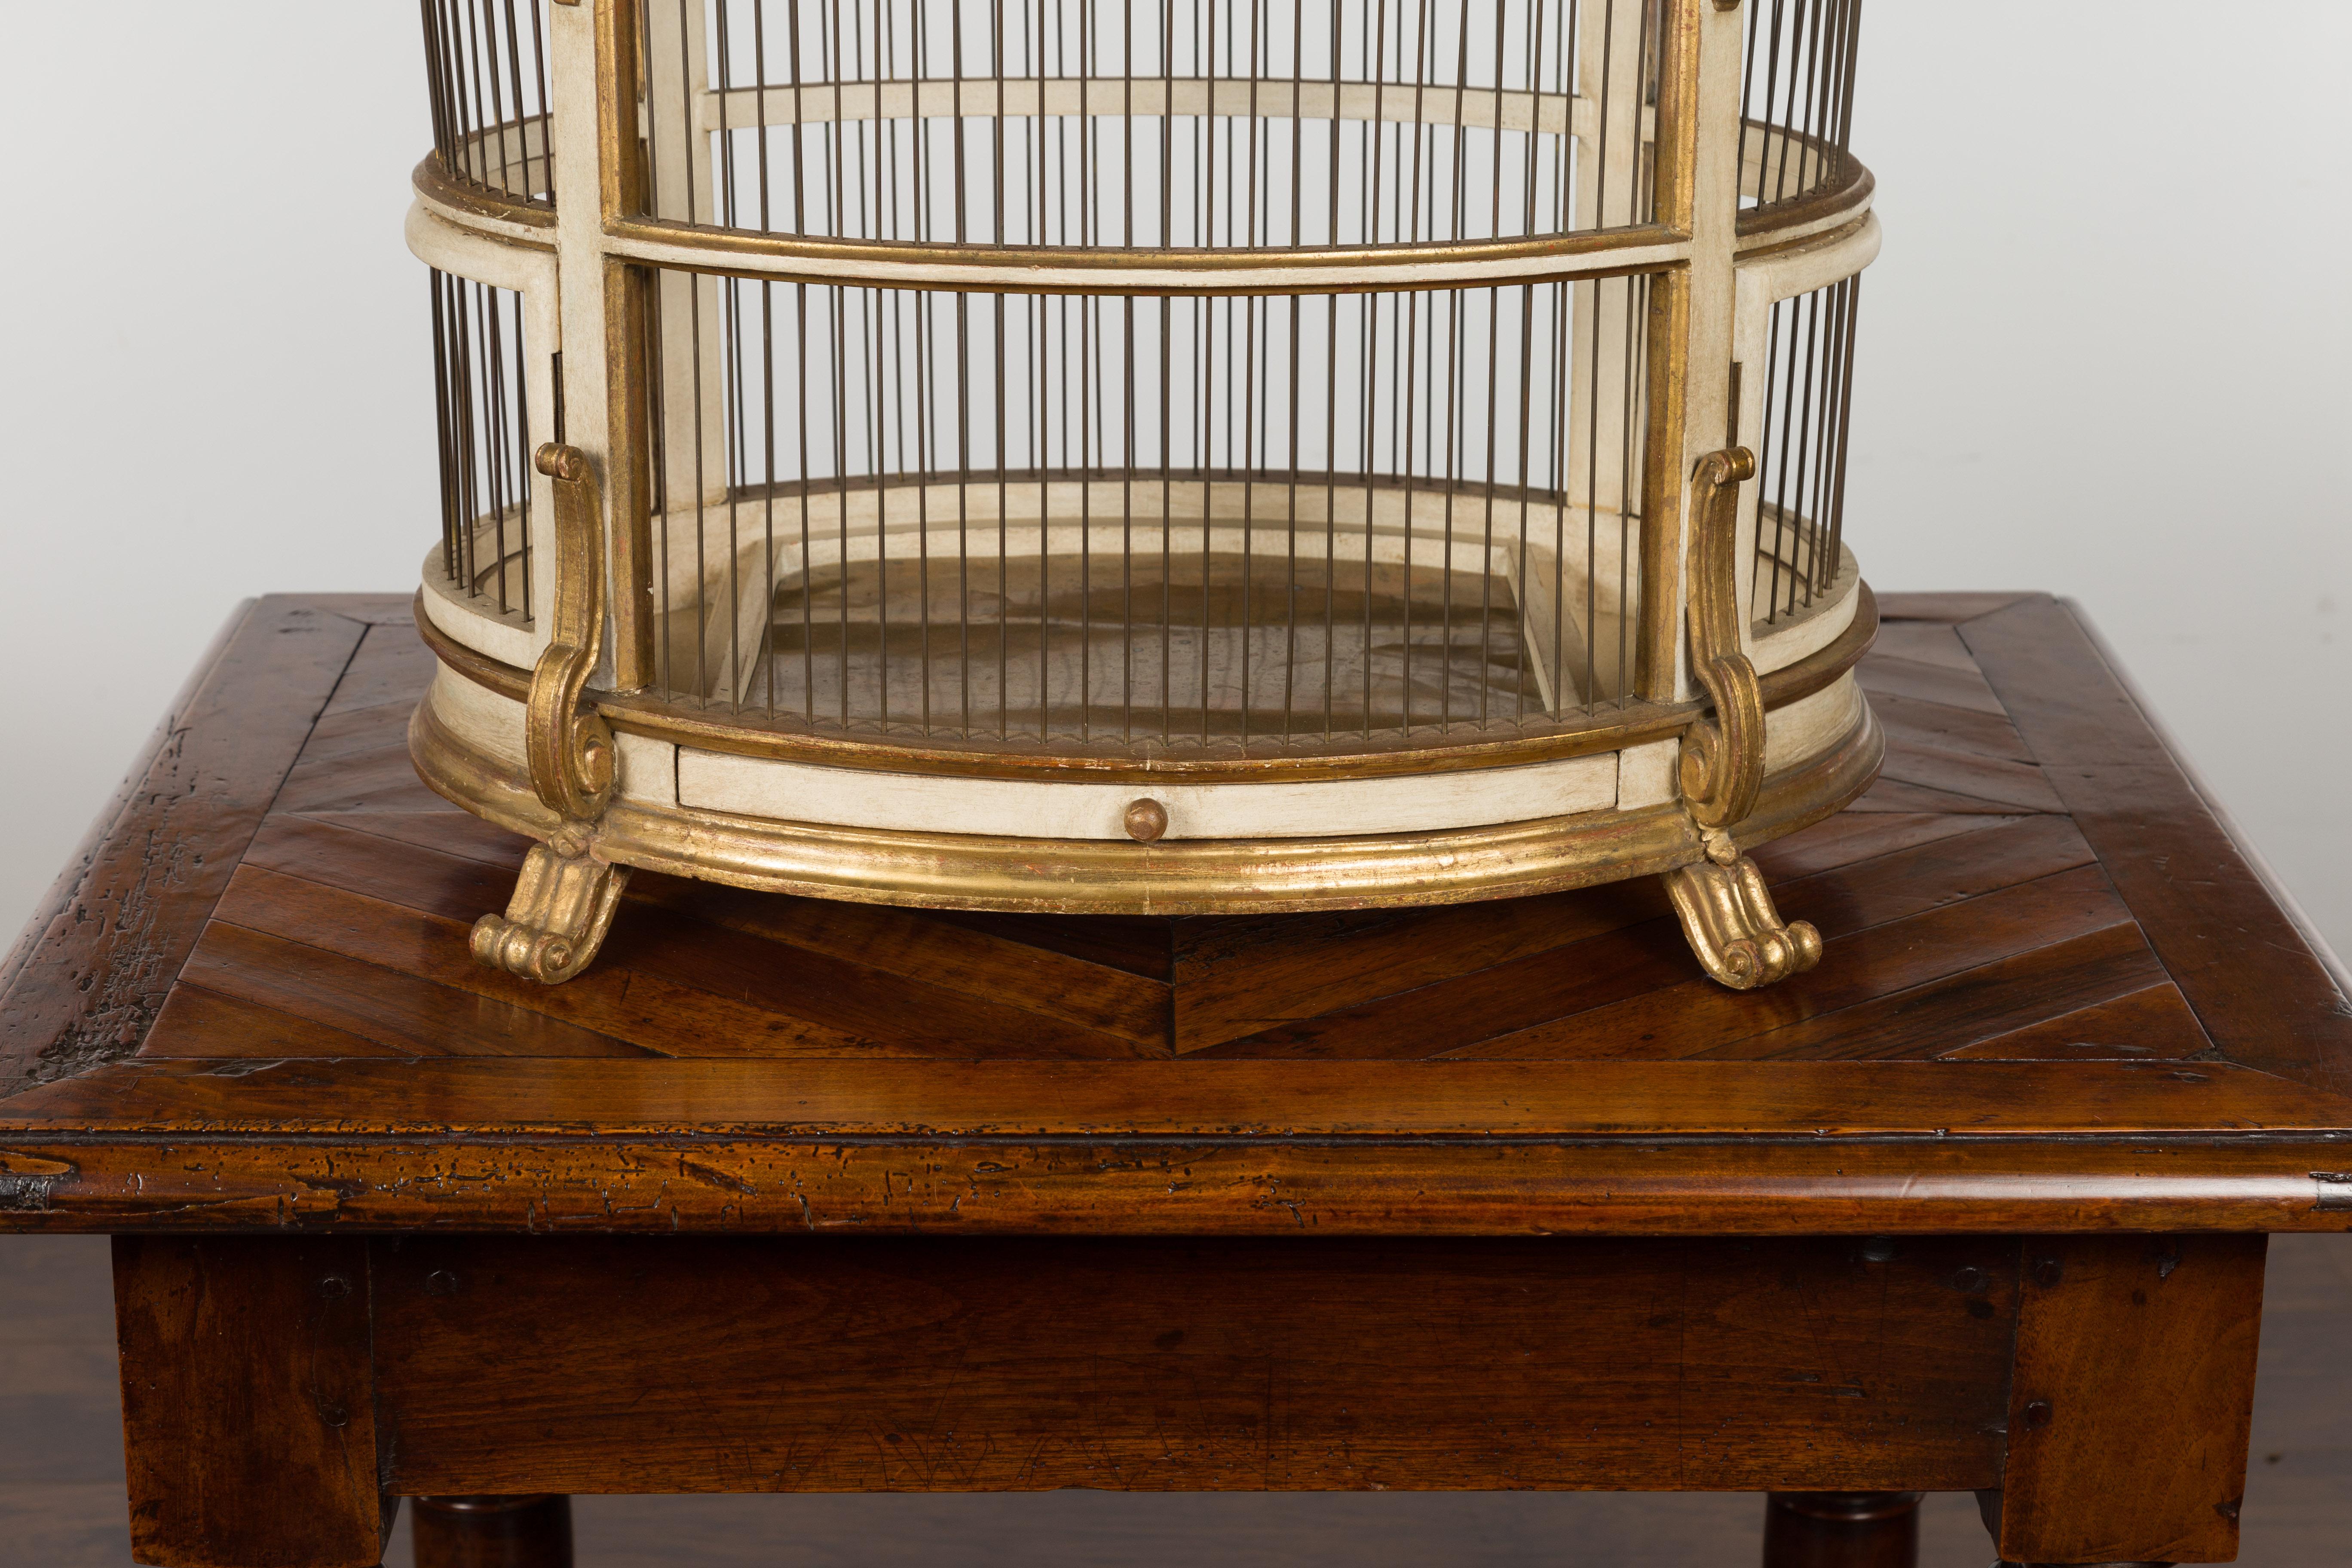 Carved Italian 1940s Rococo Style Oval Birdcage with Gilt and Painted Accents